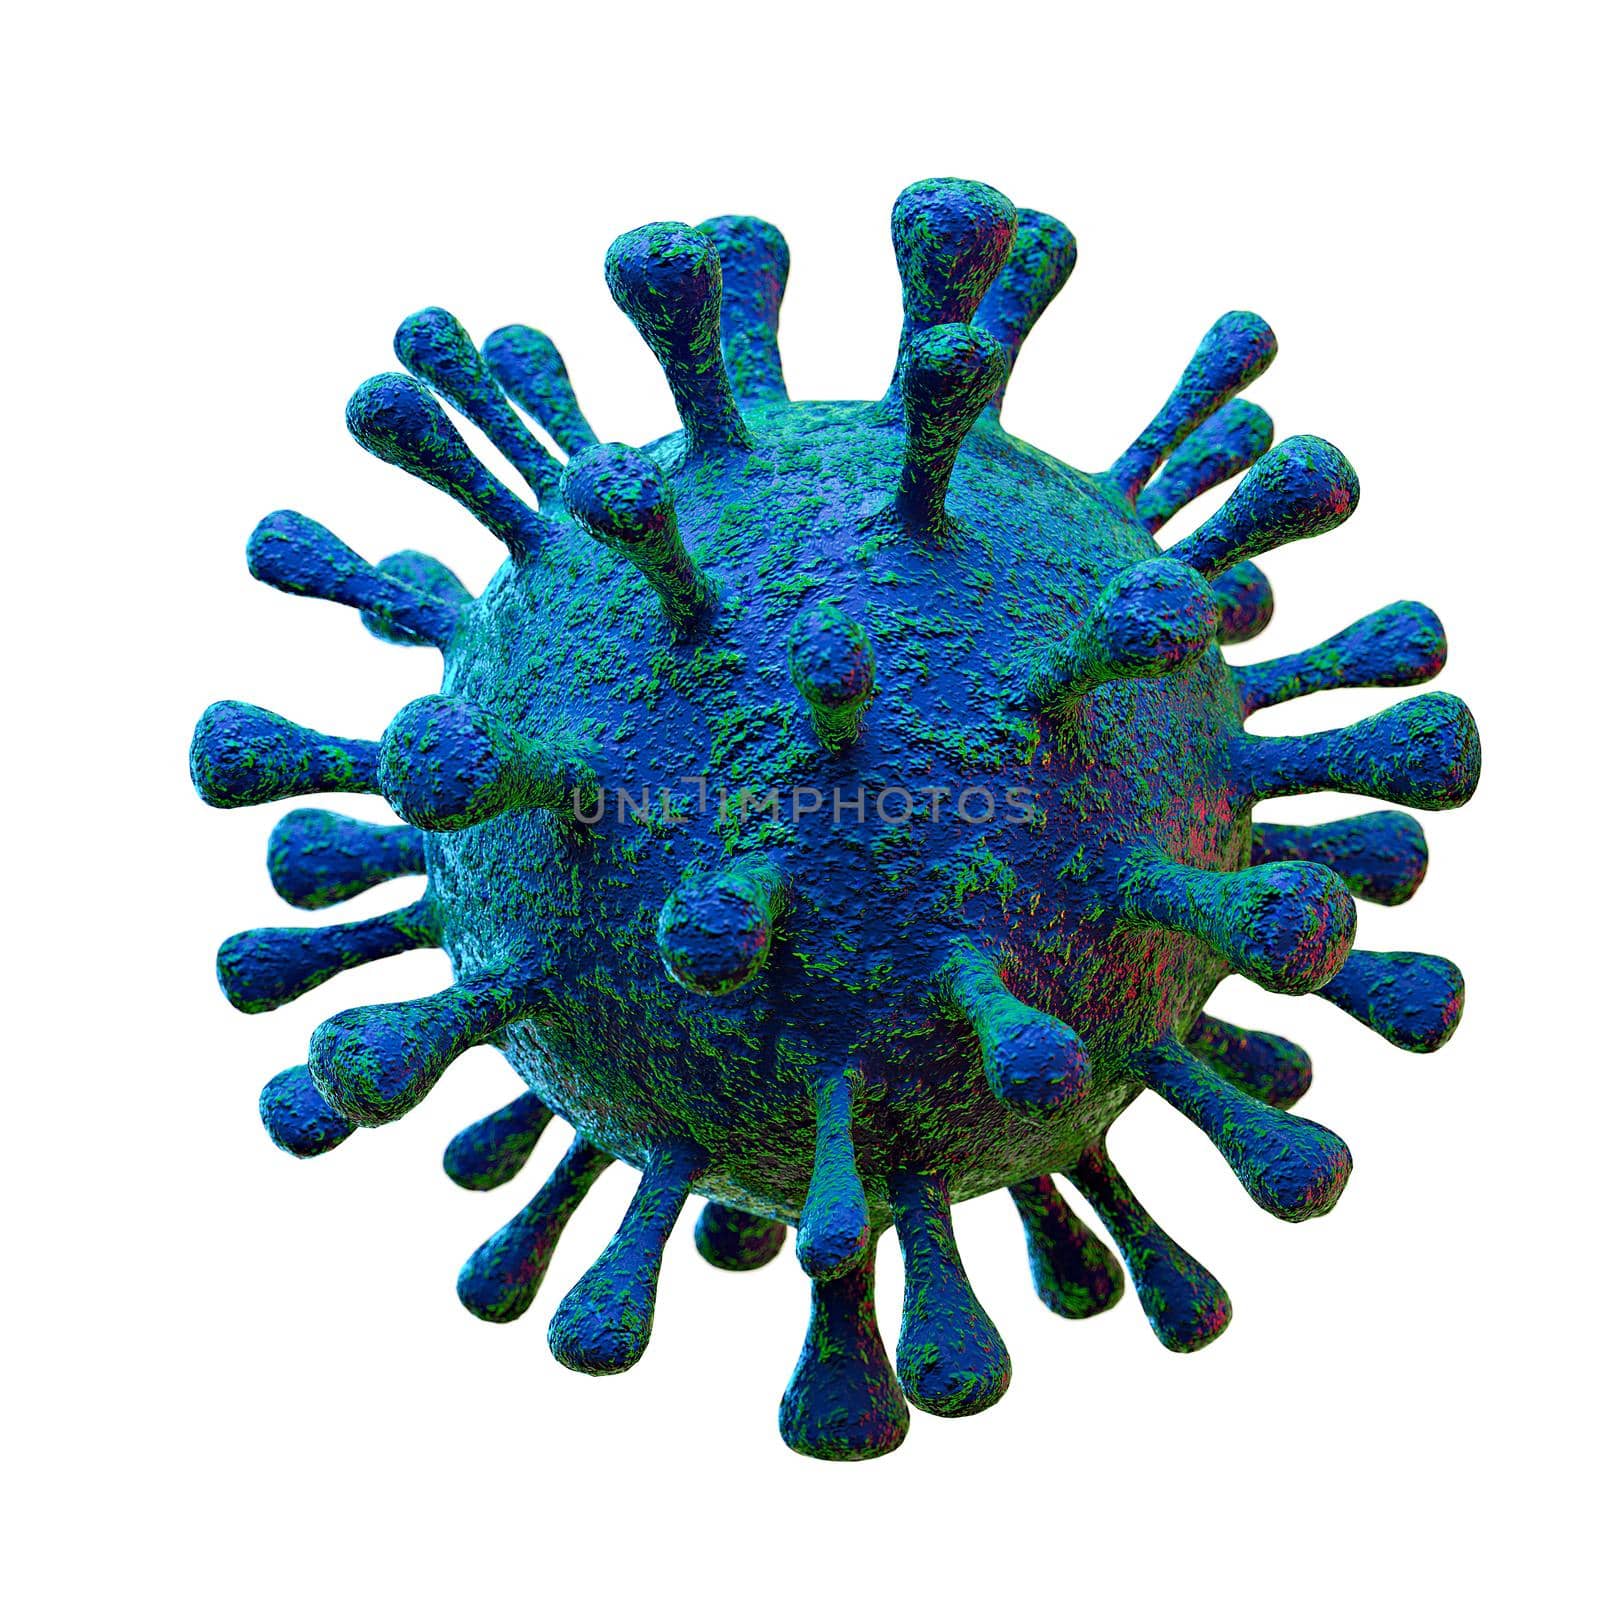 3D illustration of human virus, bacteria close-up, isolated on white background.